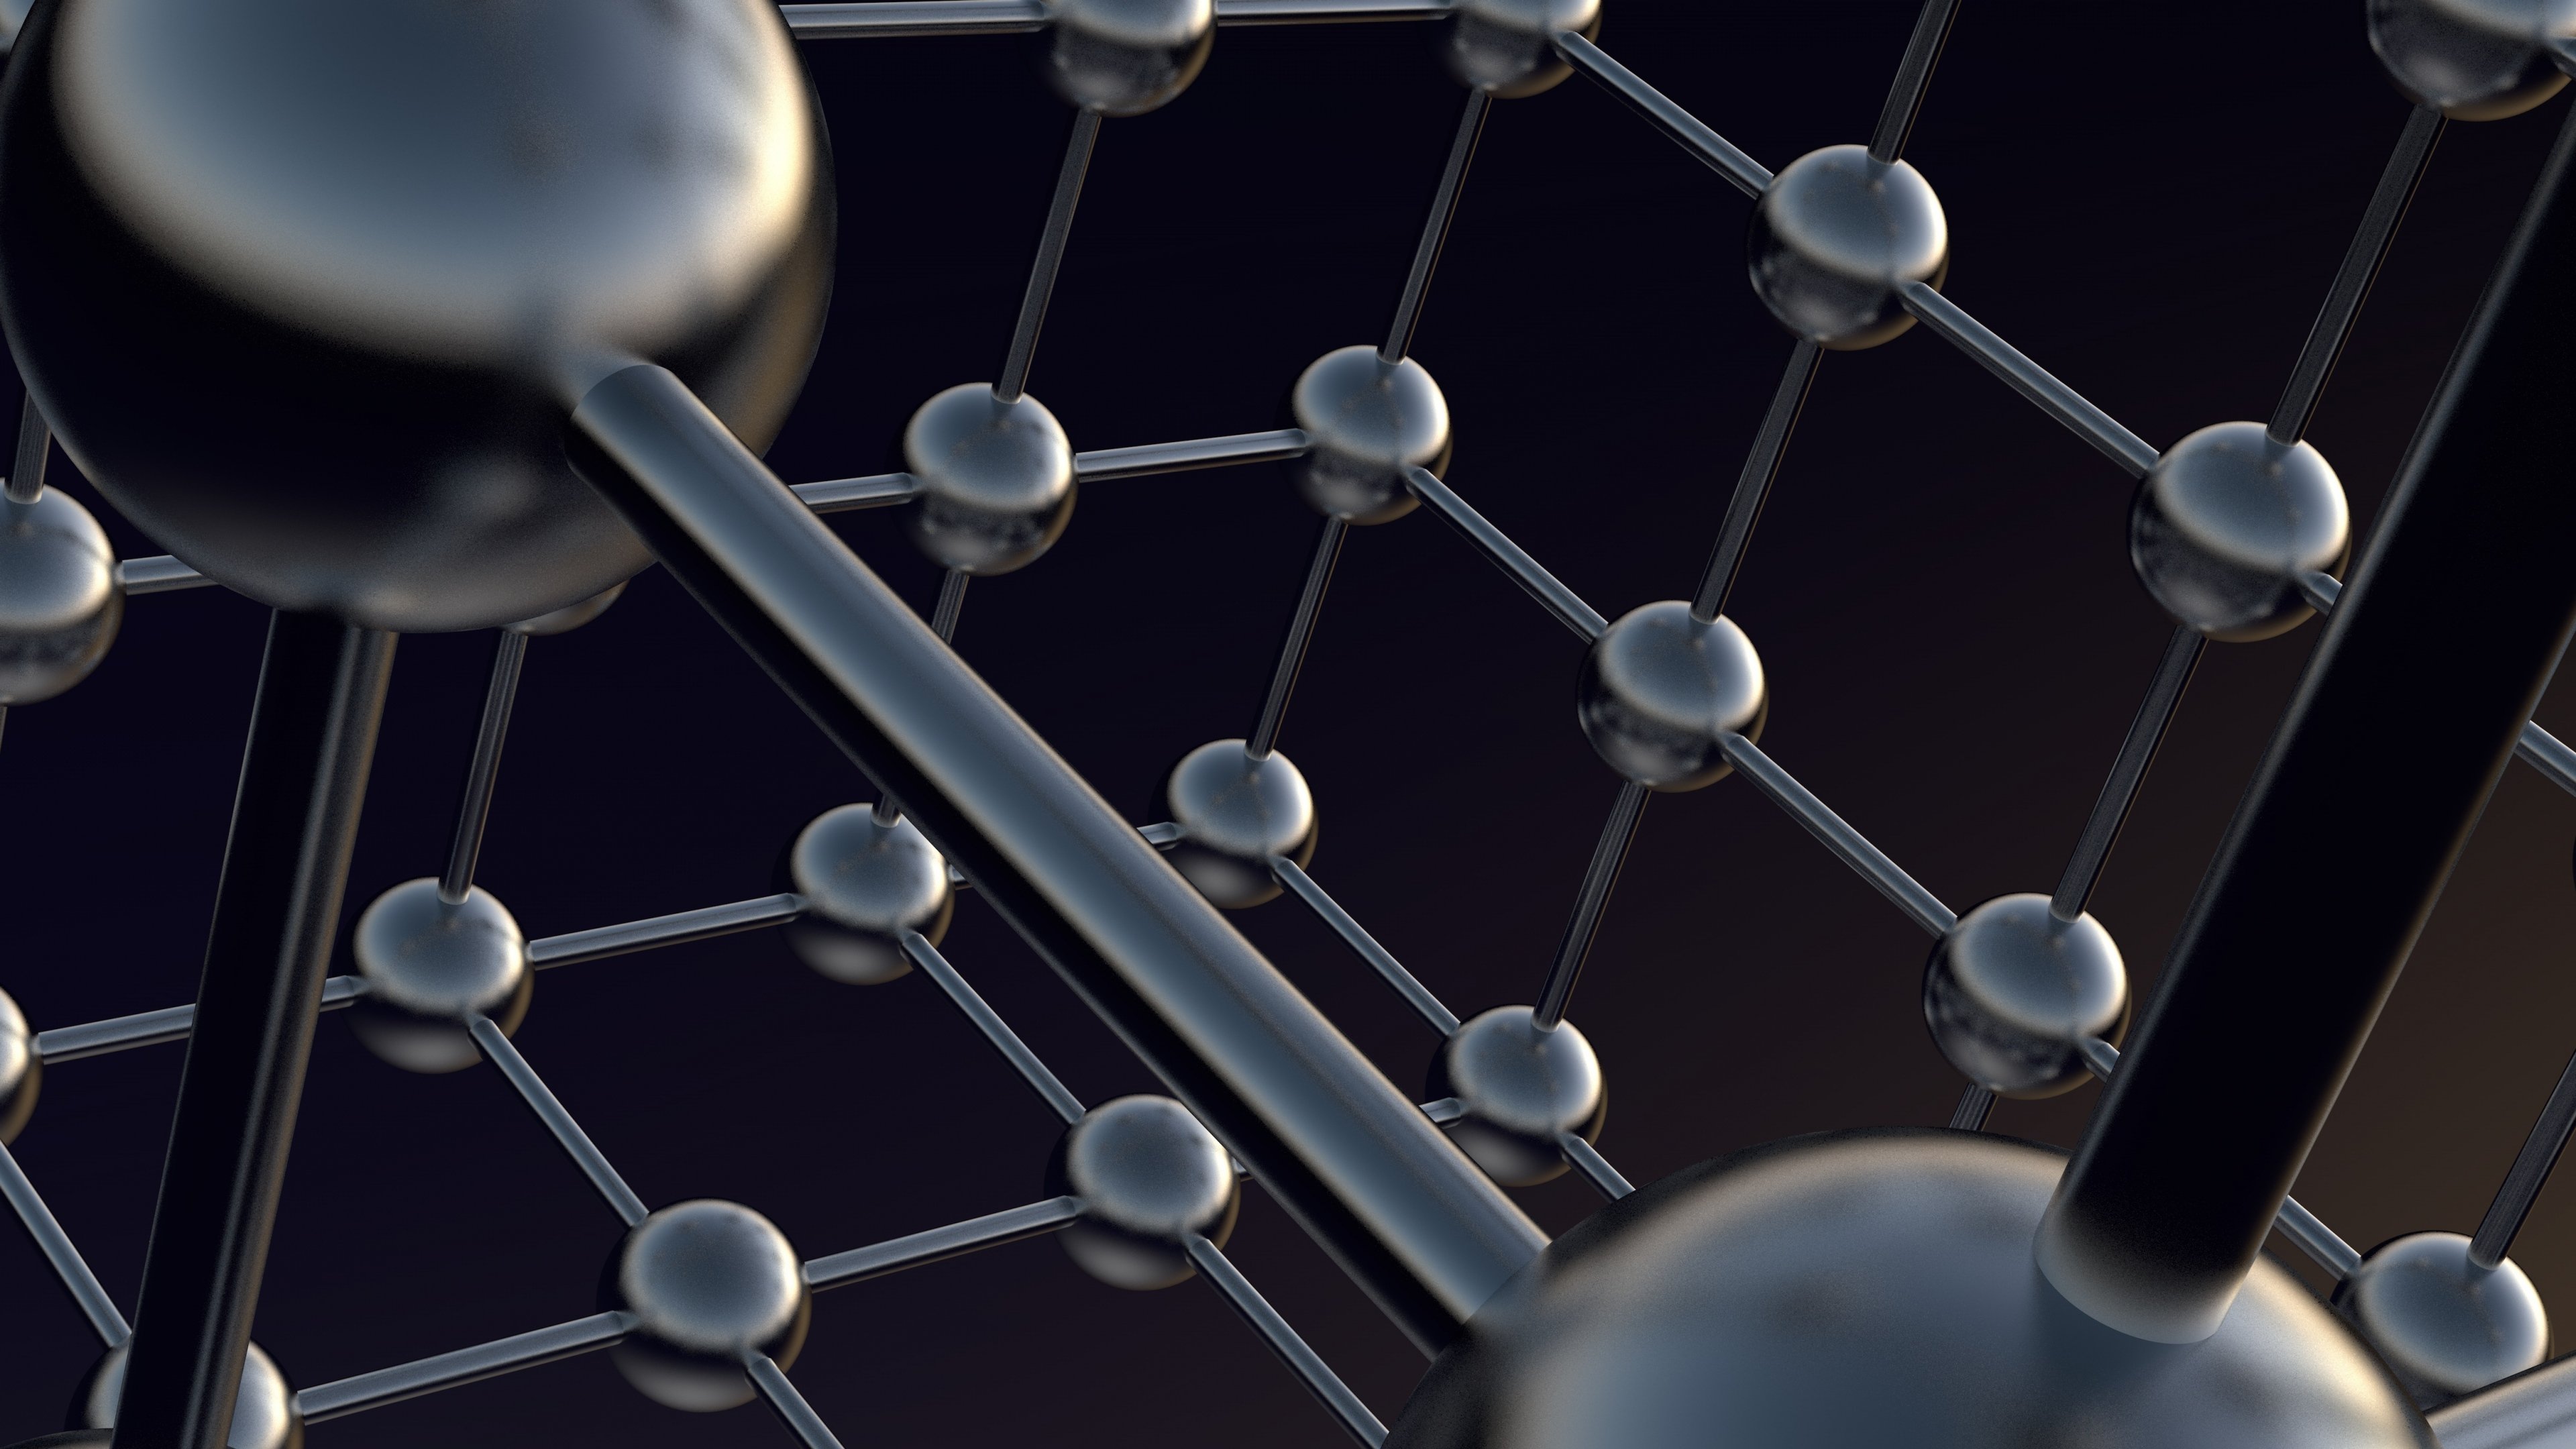 digital art, Abstract, 3D, Atoms, Sphere, Simple background, Grid, Structure, Molecular models Wallpaper